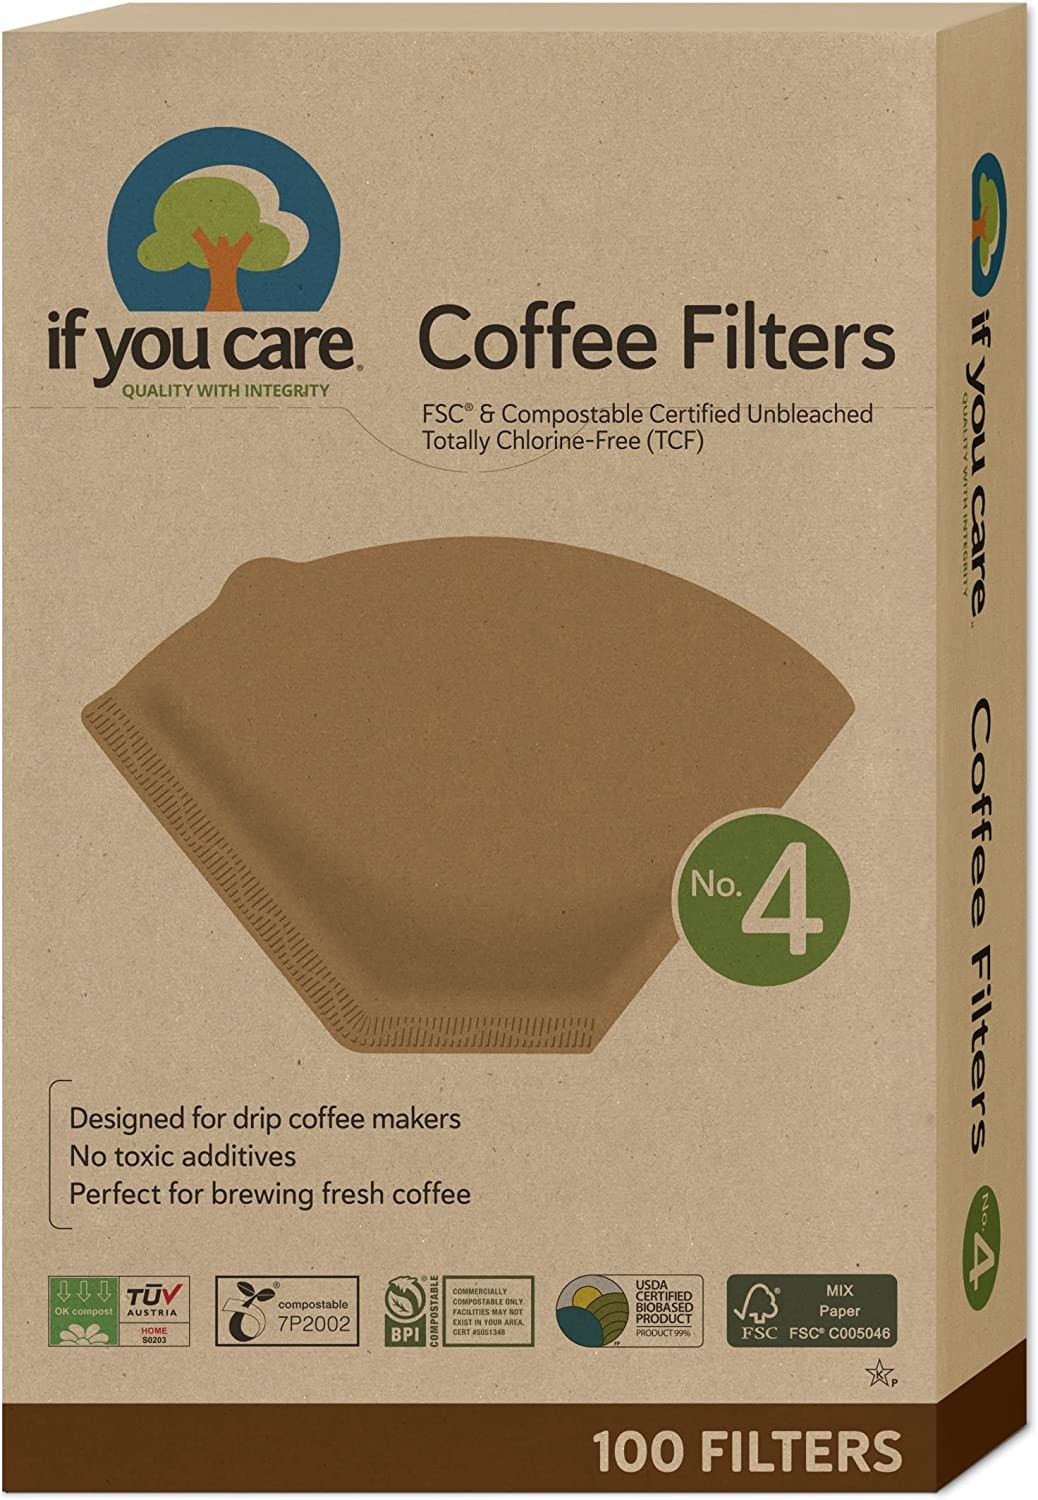 If You Care 4 Cone Shaped Unbleached All Natural Compostable Coffee Filters, 100 Count (Pack of 1), Chlorine Free Import To Shop